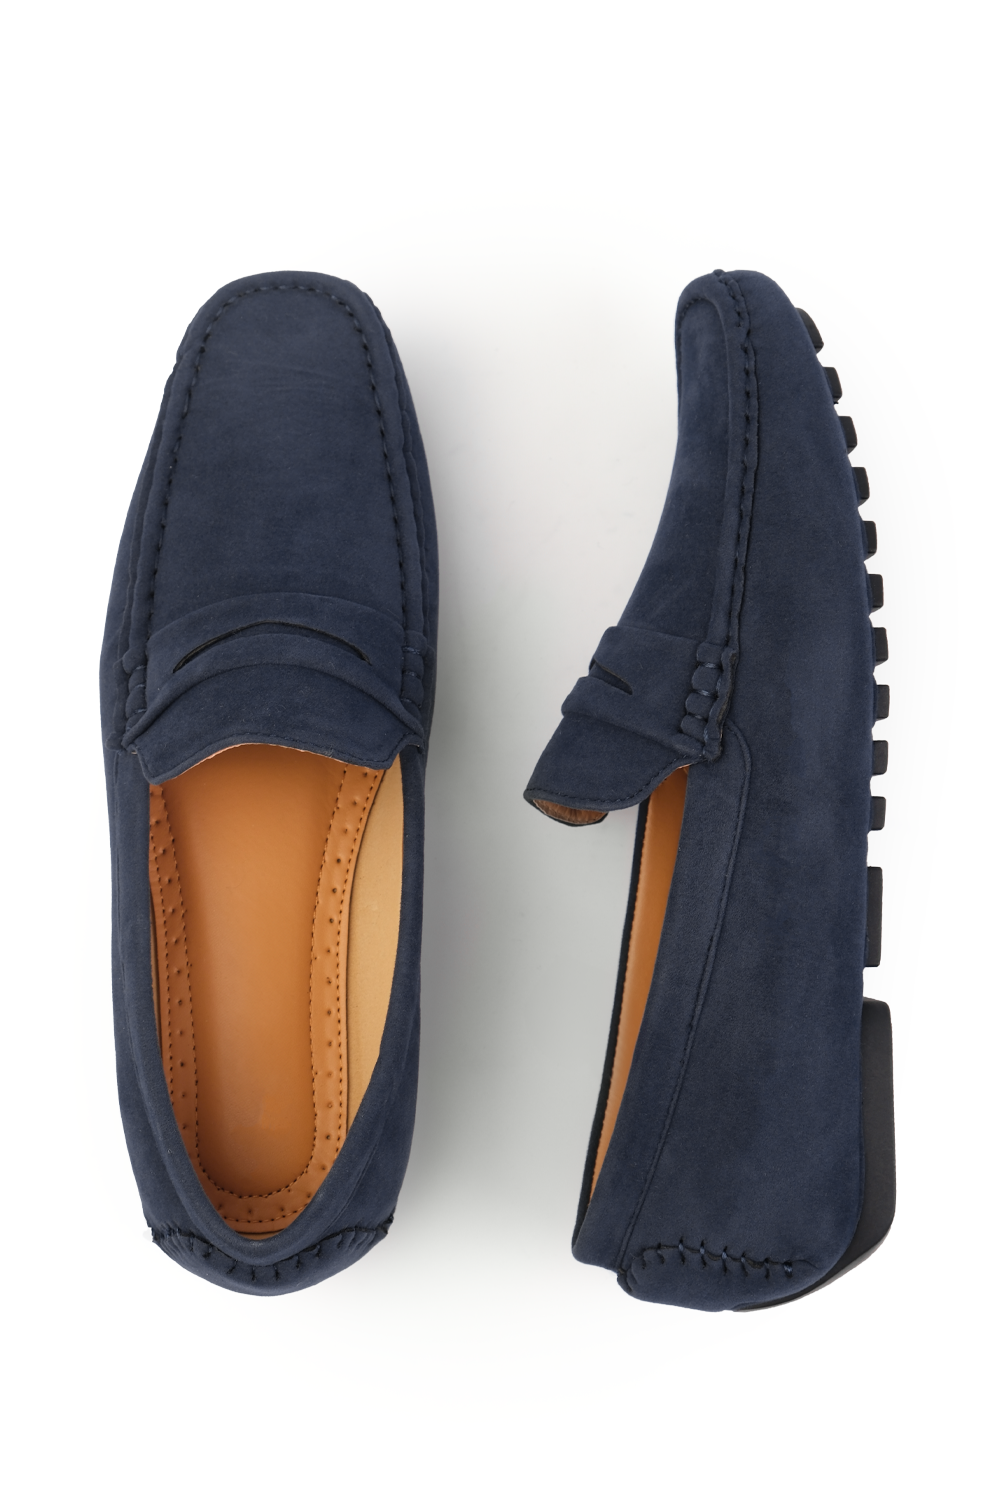 ALEX DRIVING SHOES IN BLUE SUEDE